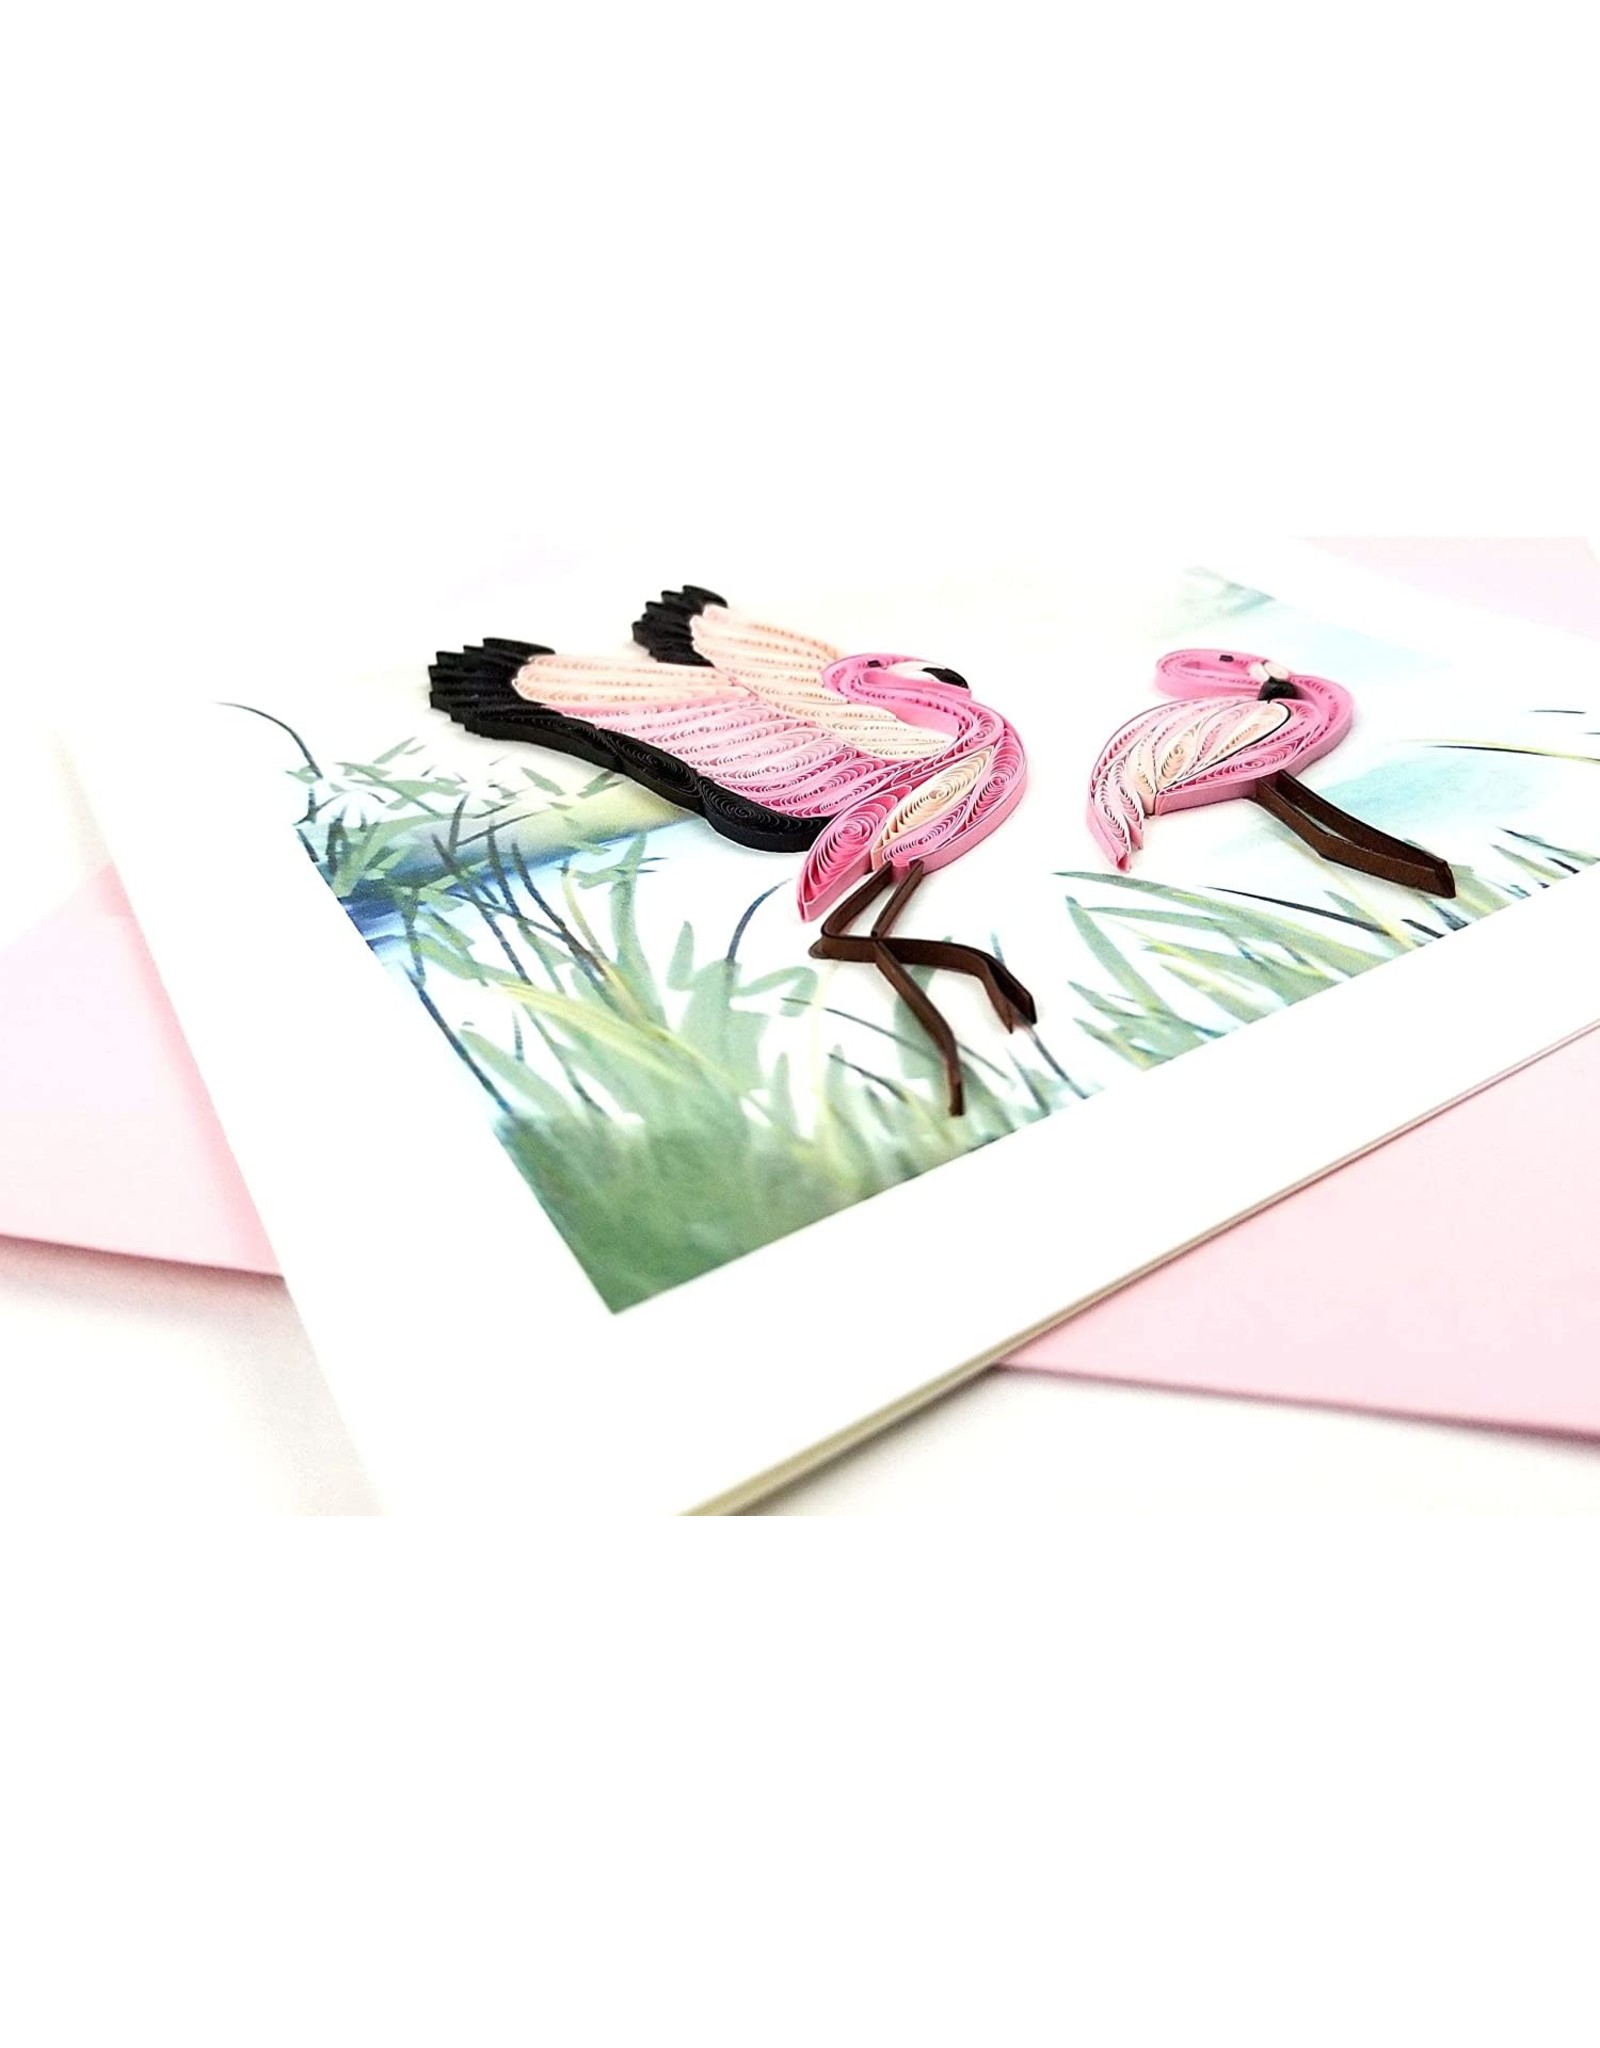 Quilling Card Quilled Flamingos Greeting Card